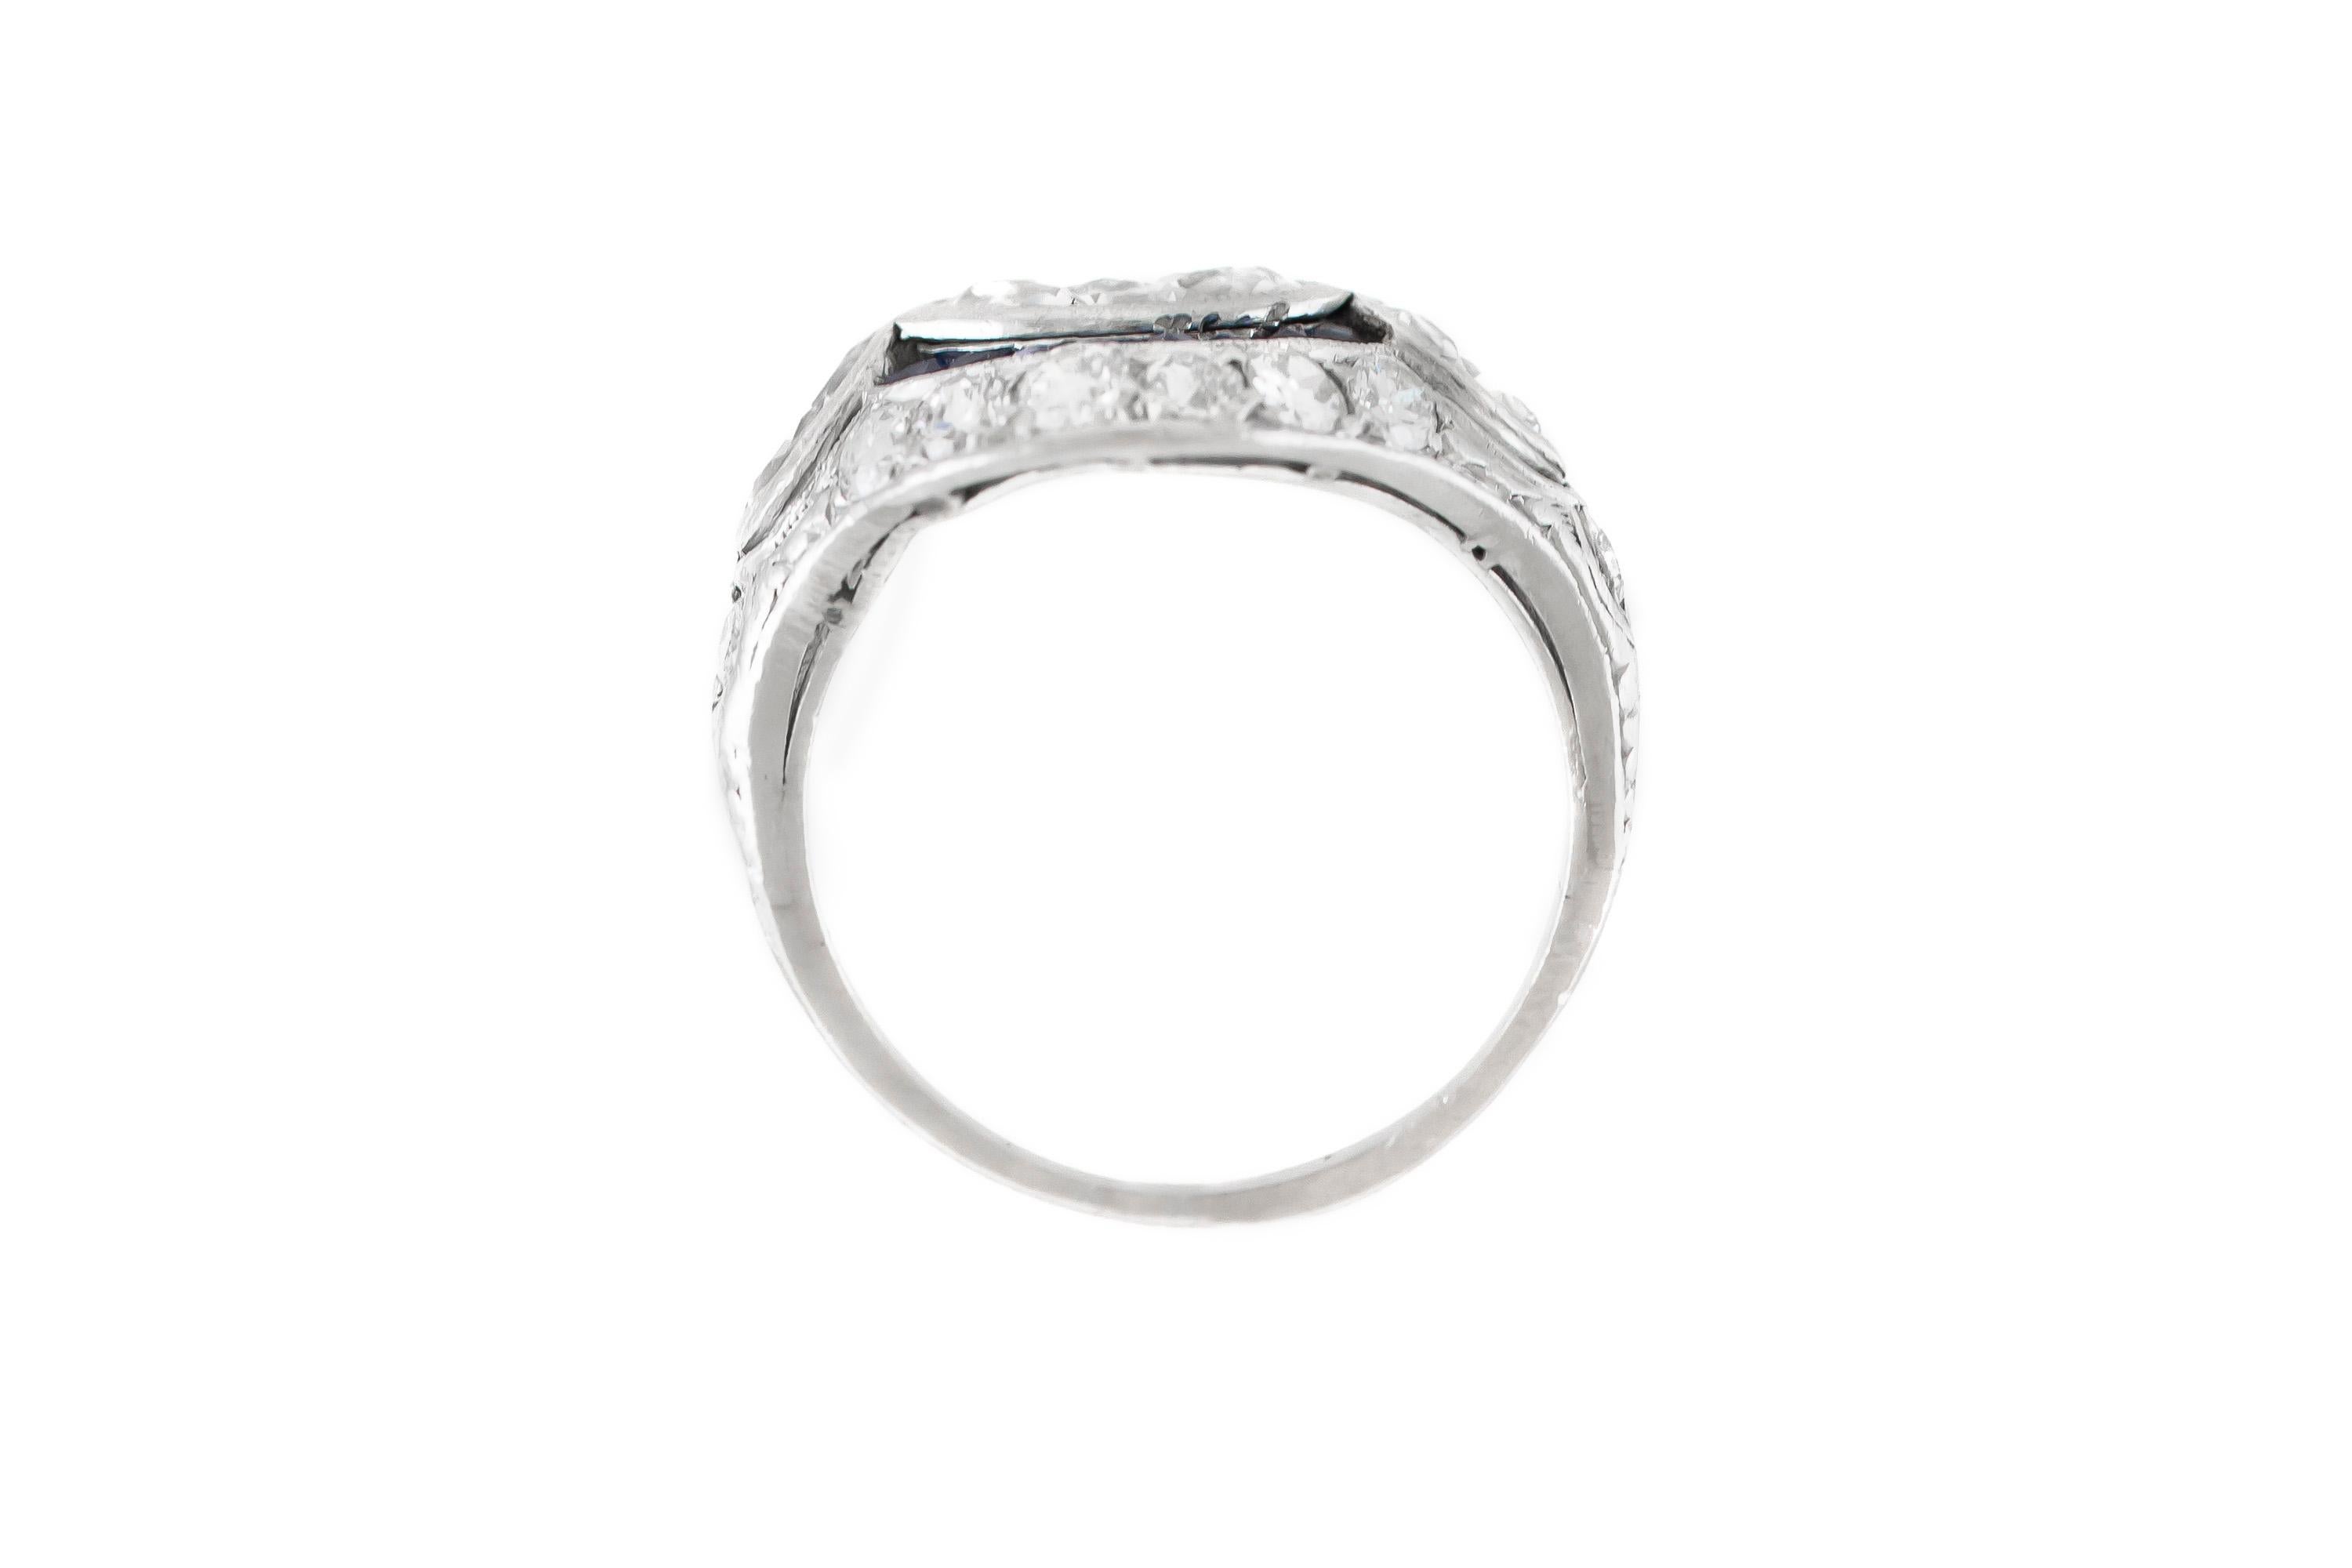 The ring is finely crafted in platinum with sapphires and diamonds weighing approximately total of 2.10 carat.
